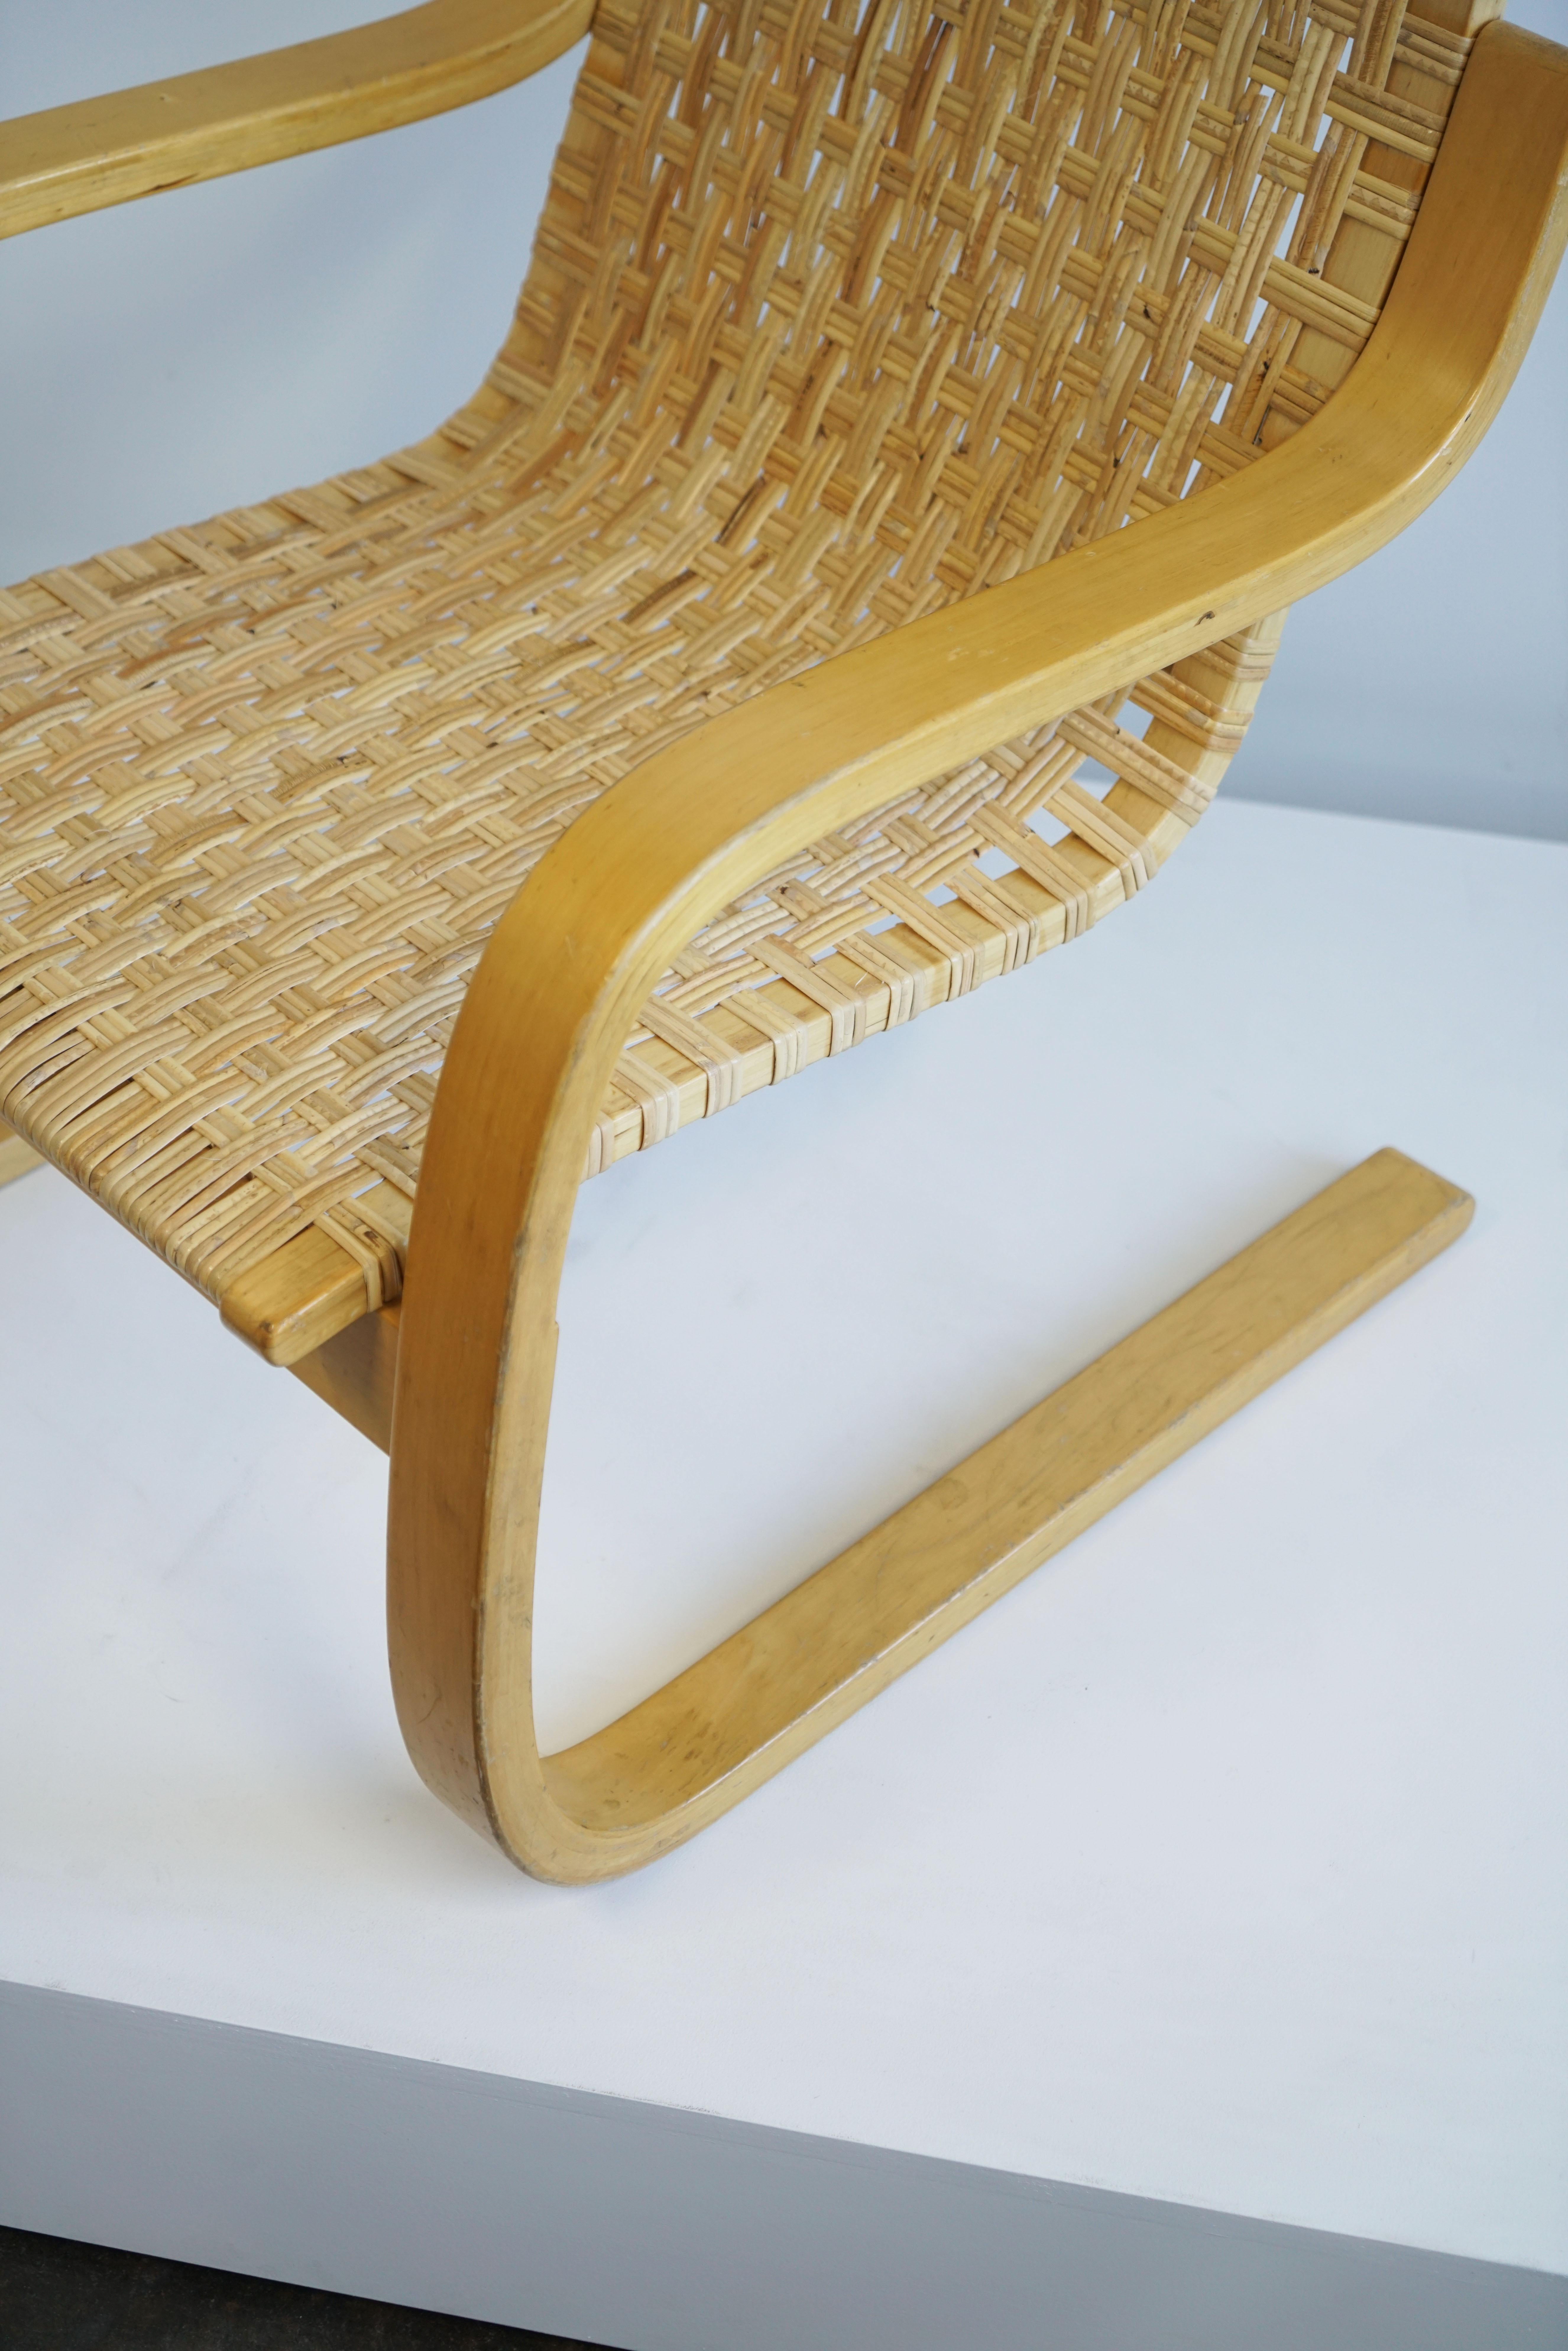 1960 Alvar Aalto Cantilever Chair Model 406 by Artek in Birch and Cane Webbing In Good Condition For Sale In Chicago, IL